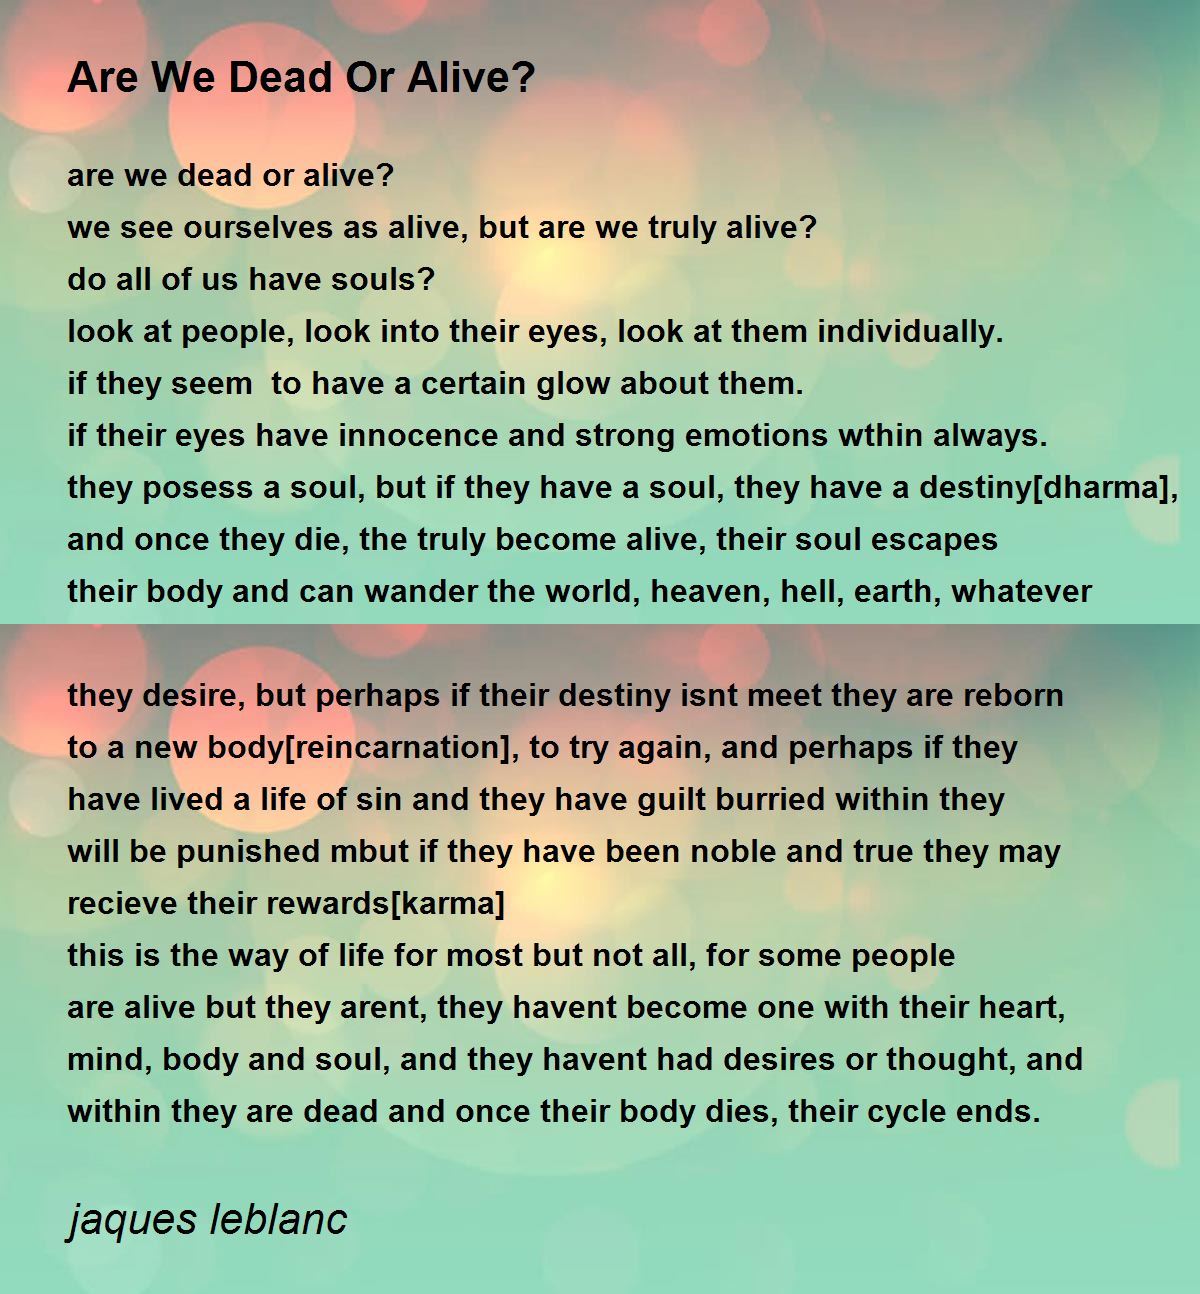 Are You Worth More Dead or Alive? - POEMS